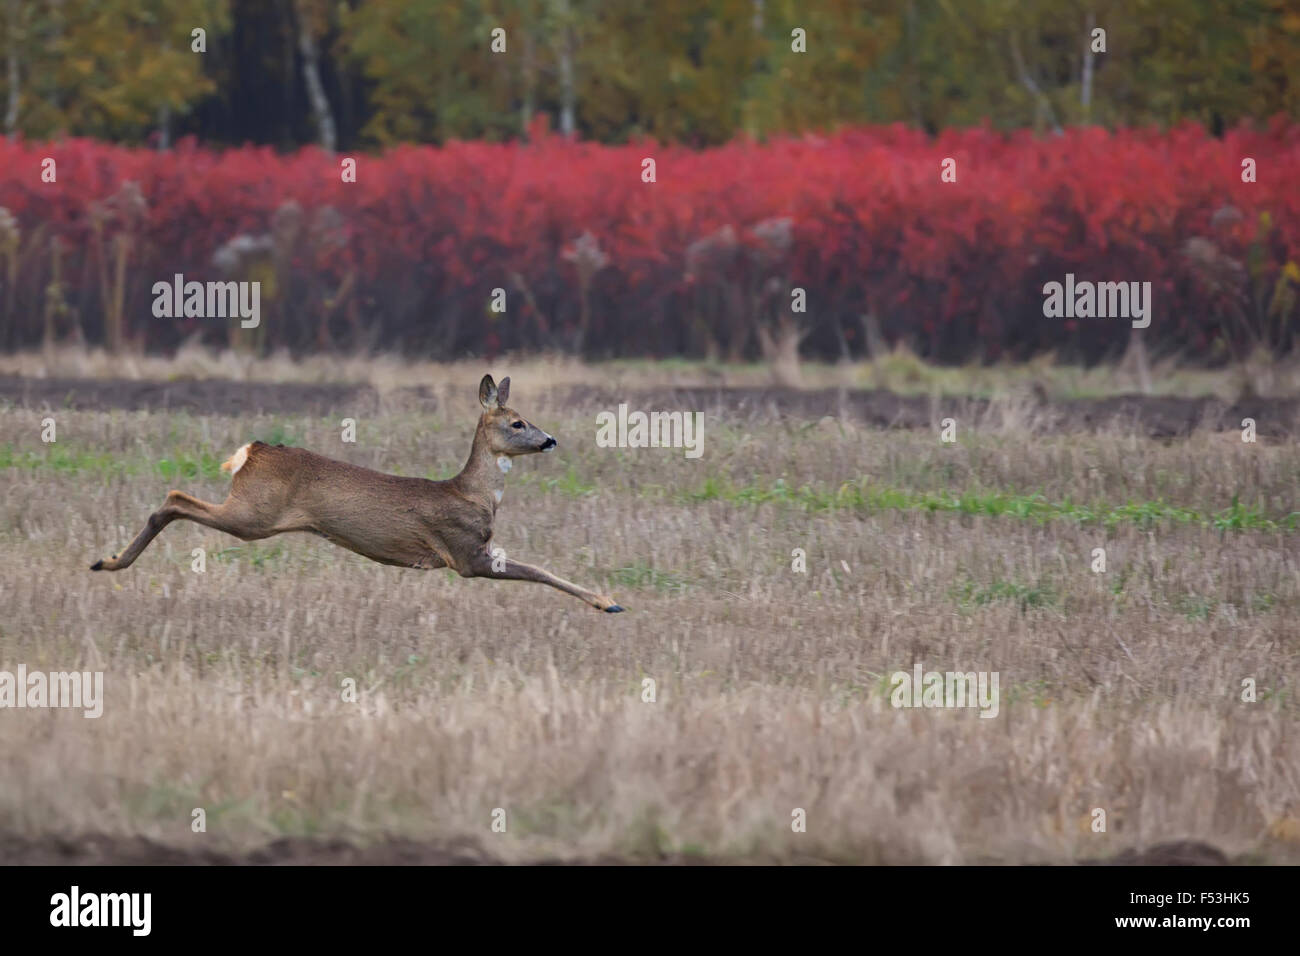 Roe-deer on the run in the wild Stock Photo